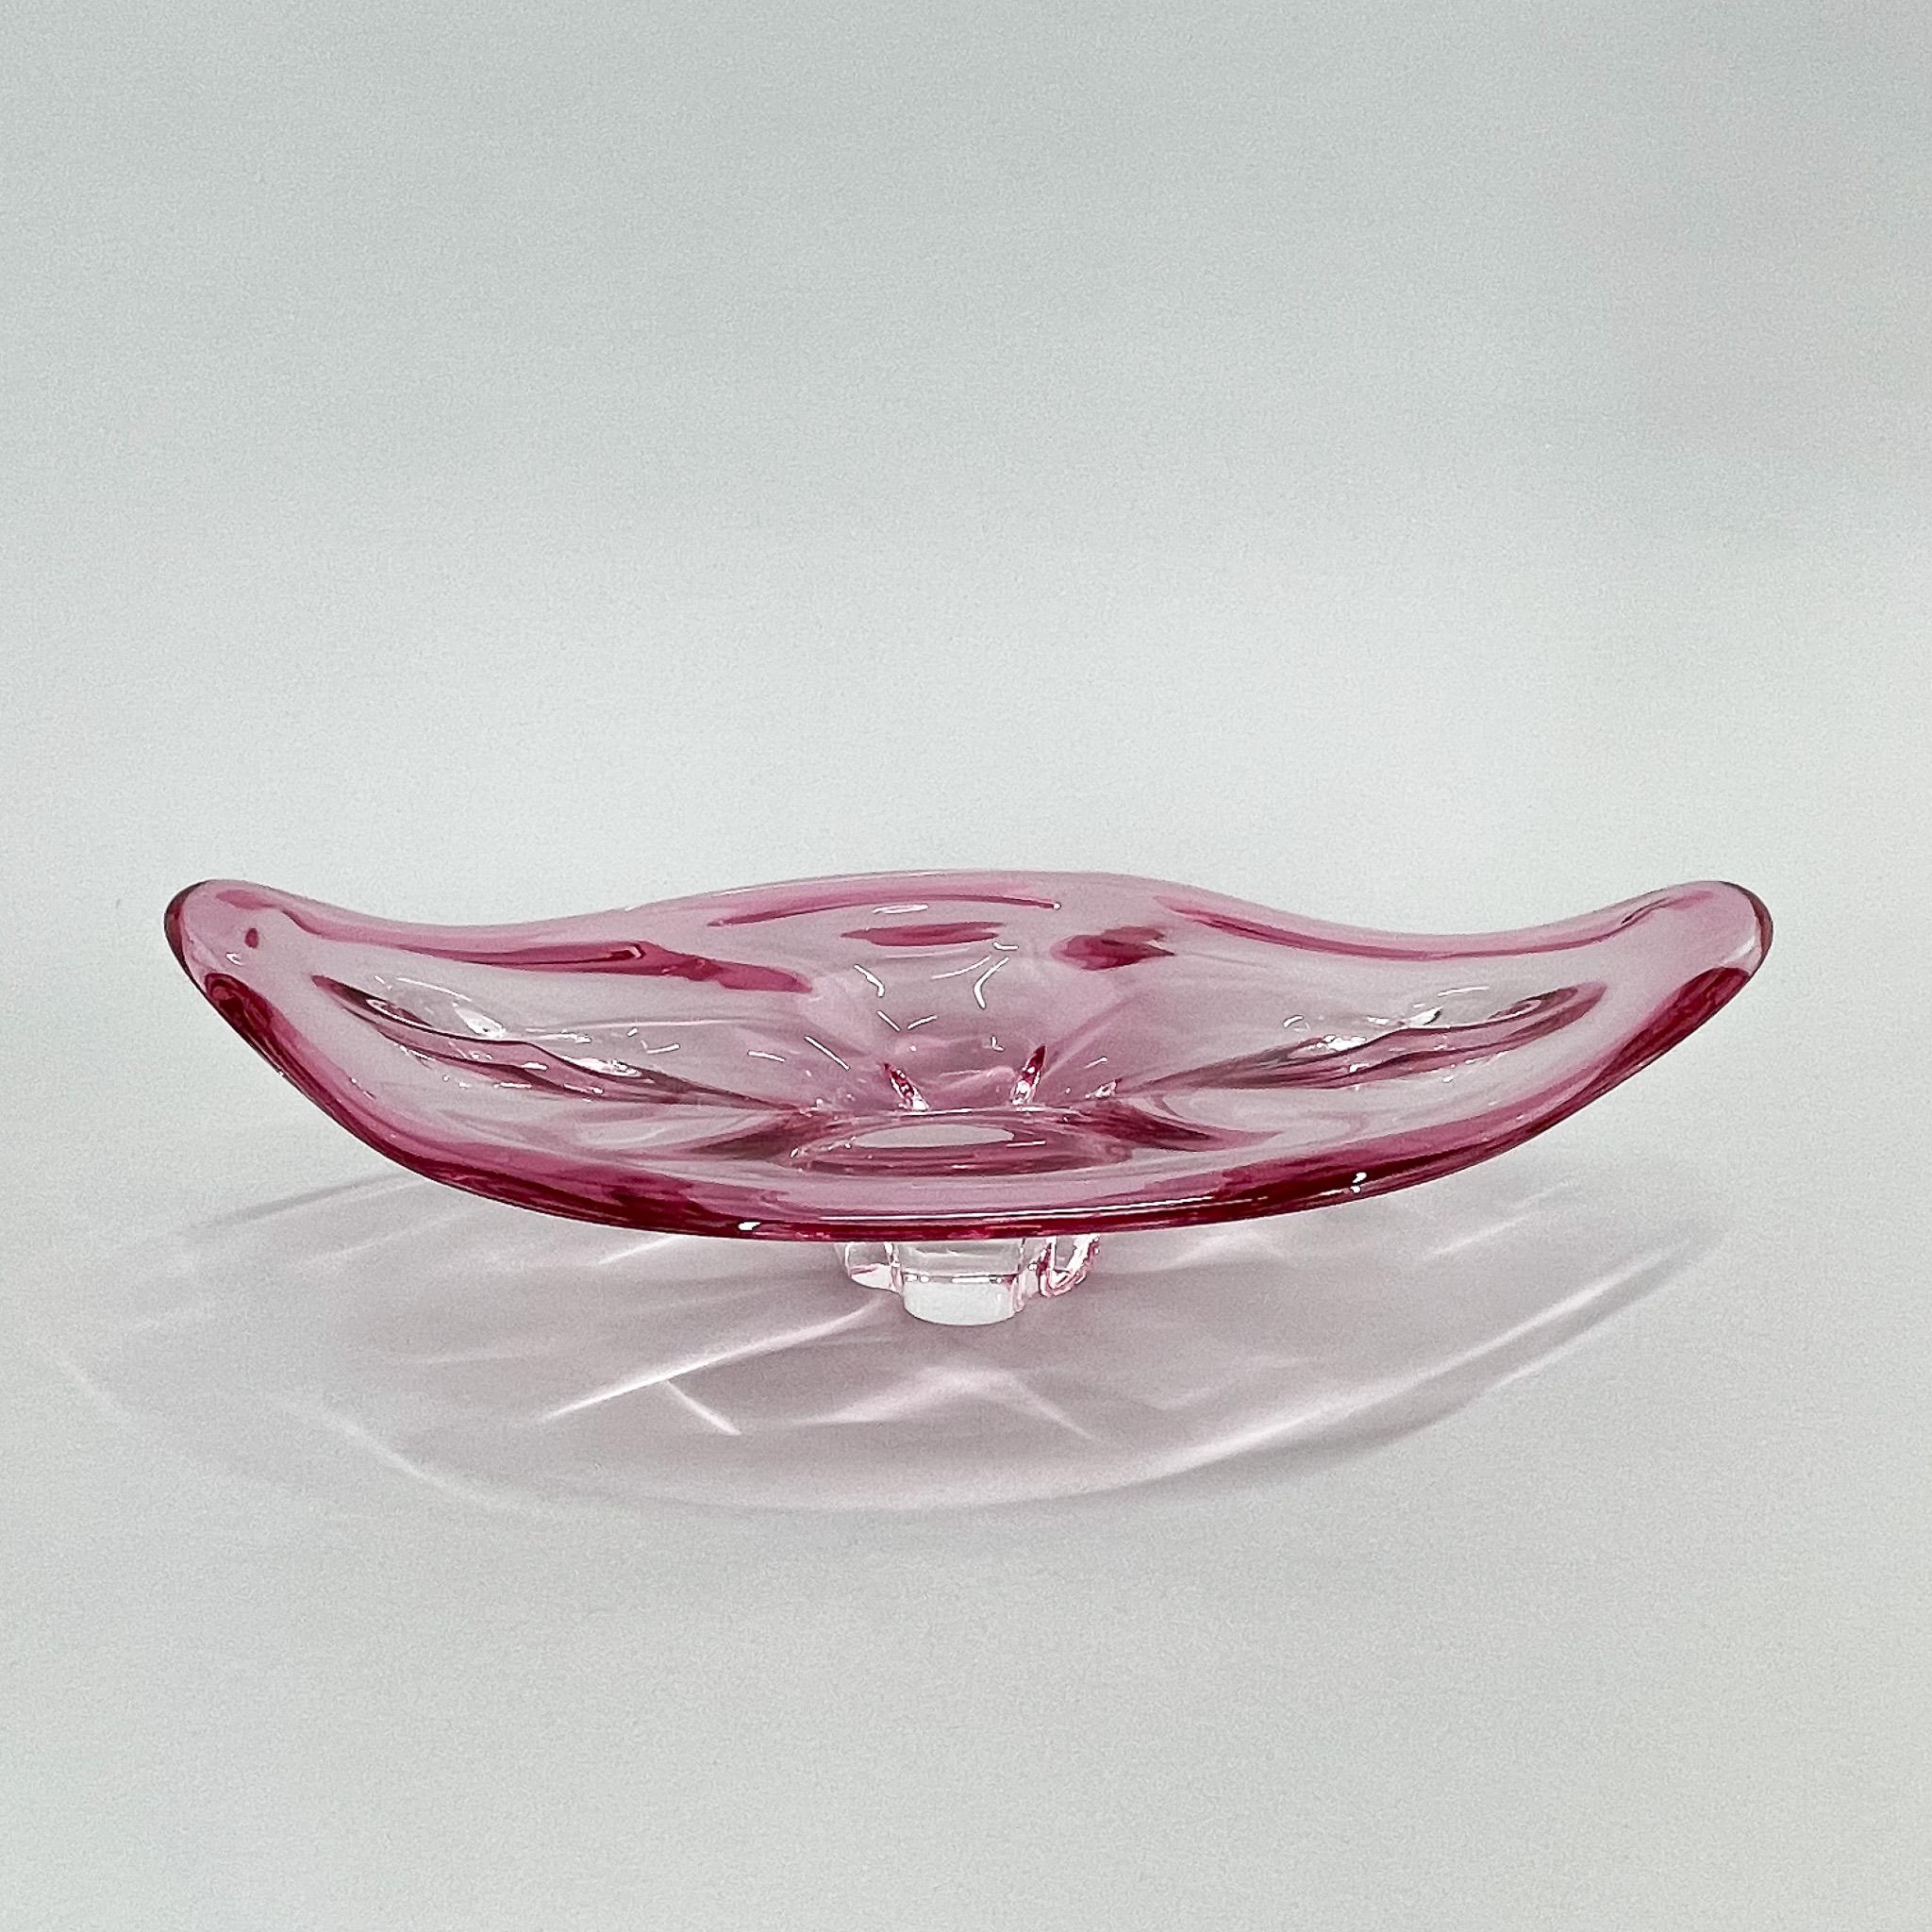 Heavy glass bowl designed by Josef Hospodka in the 1960s and manufactured by Chribska glassworks in former Czechoslovakia. 